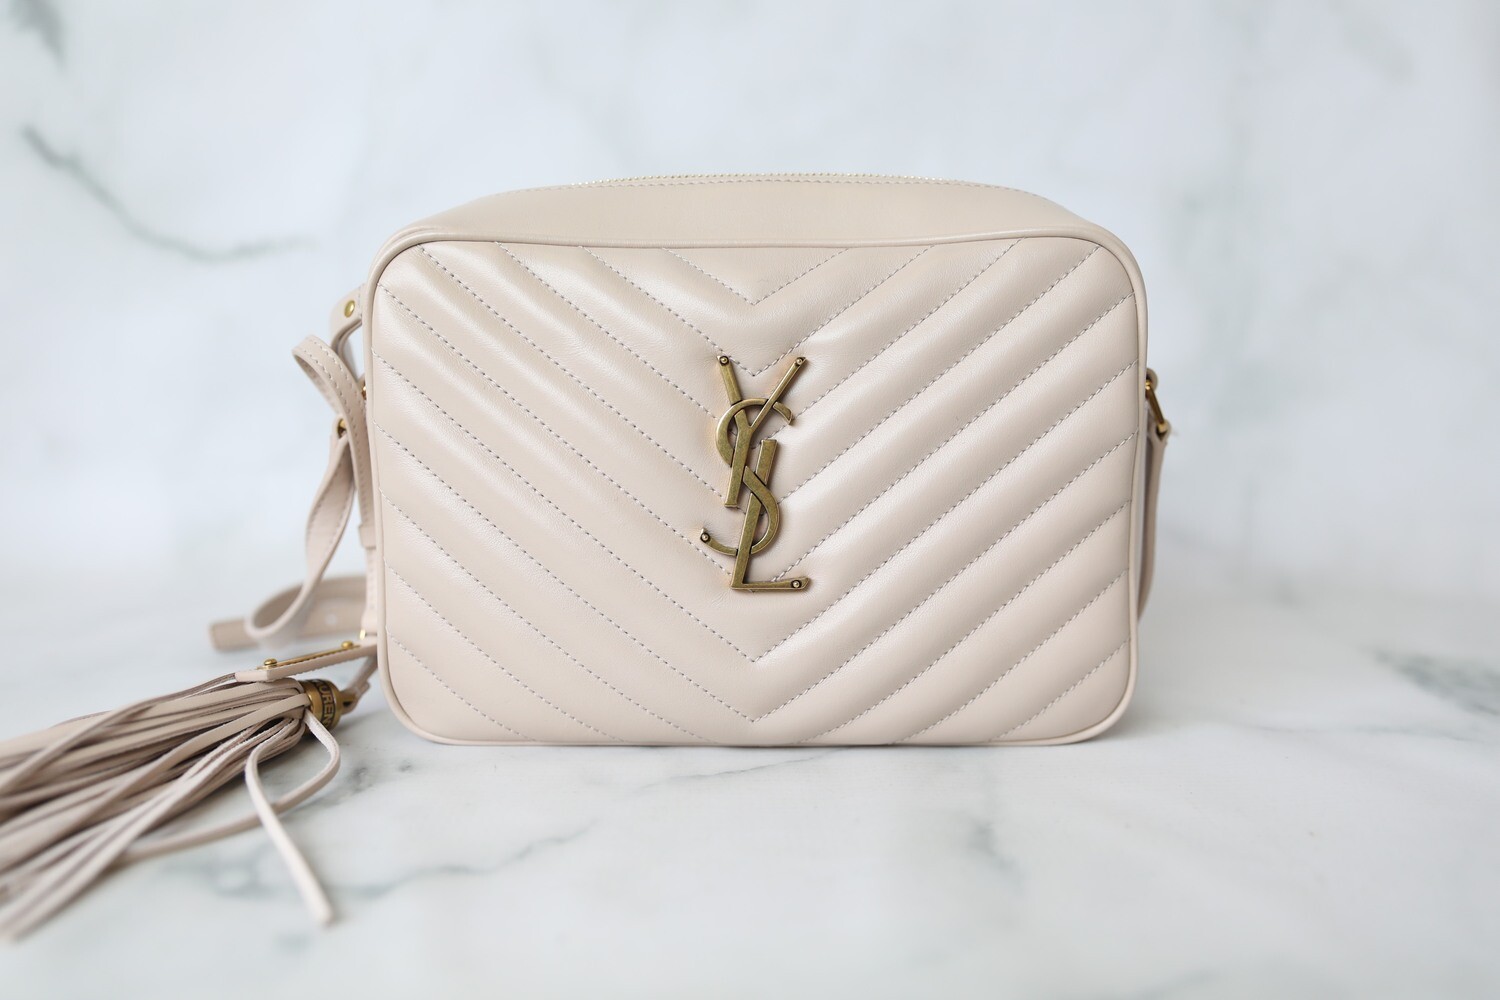 Saint Laurent Lou Lou Camera Bag, Nude Beige with Gold Hardware, Preowned in Dustbag WA001